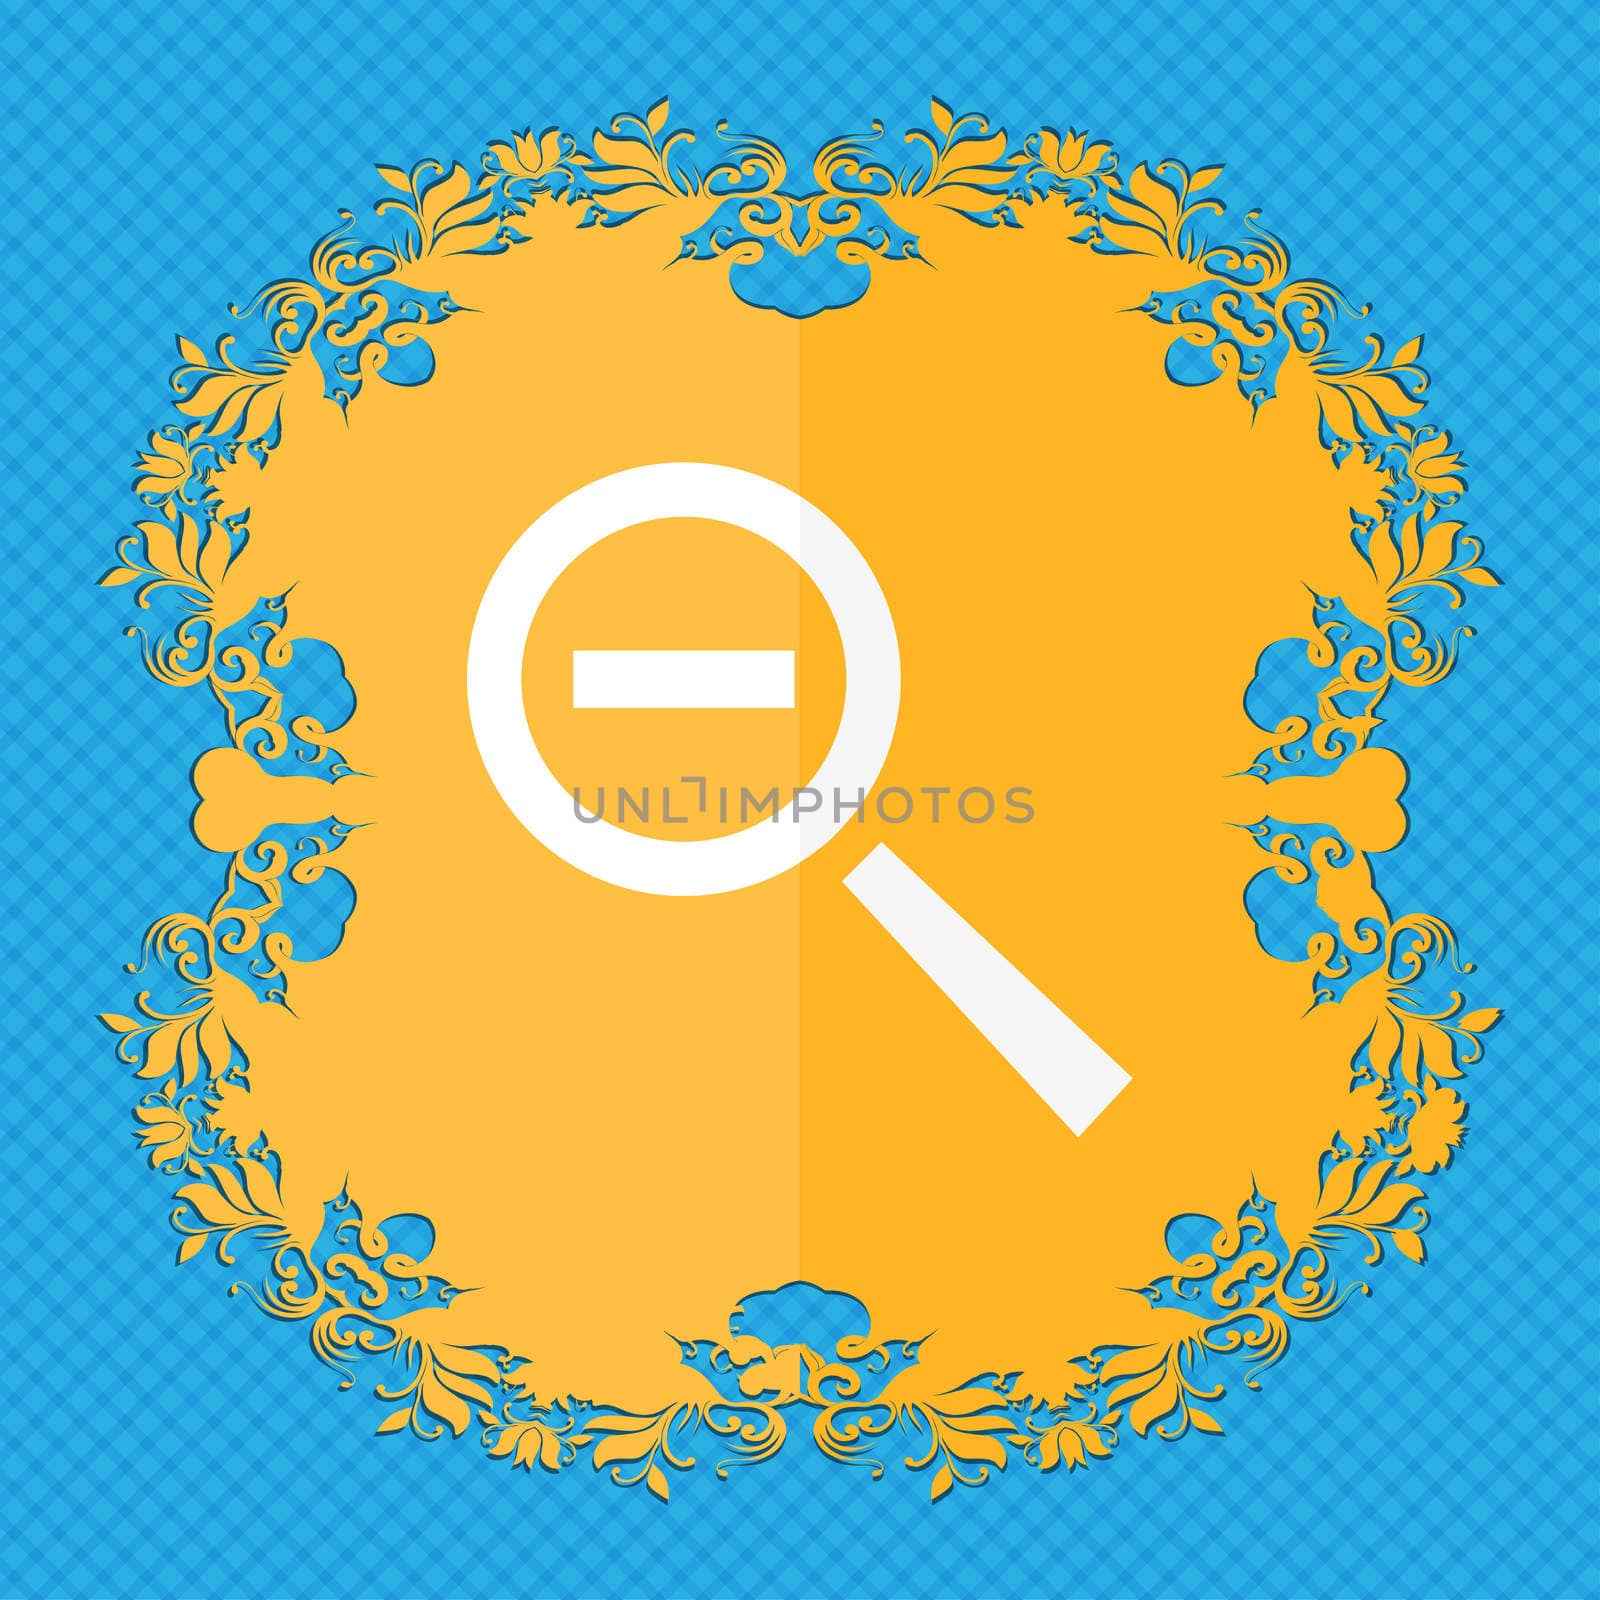 Magnifier glass, Zoom tool icon sign. Floral flat design on a blue abstract background with place for your text.  by serhii_lohvyniuk